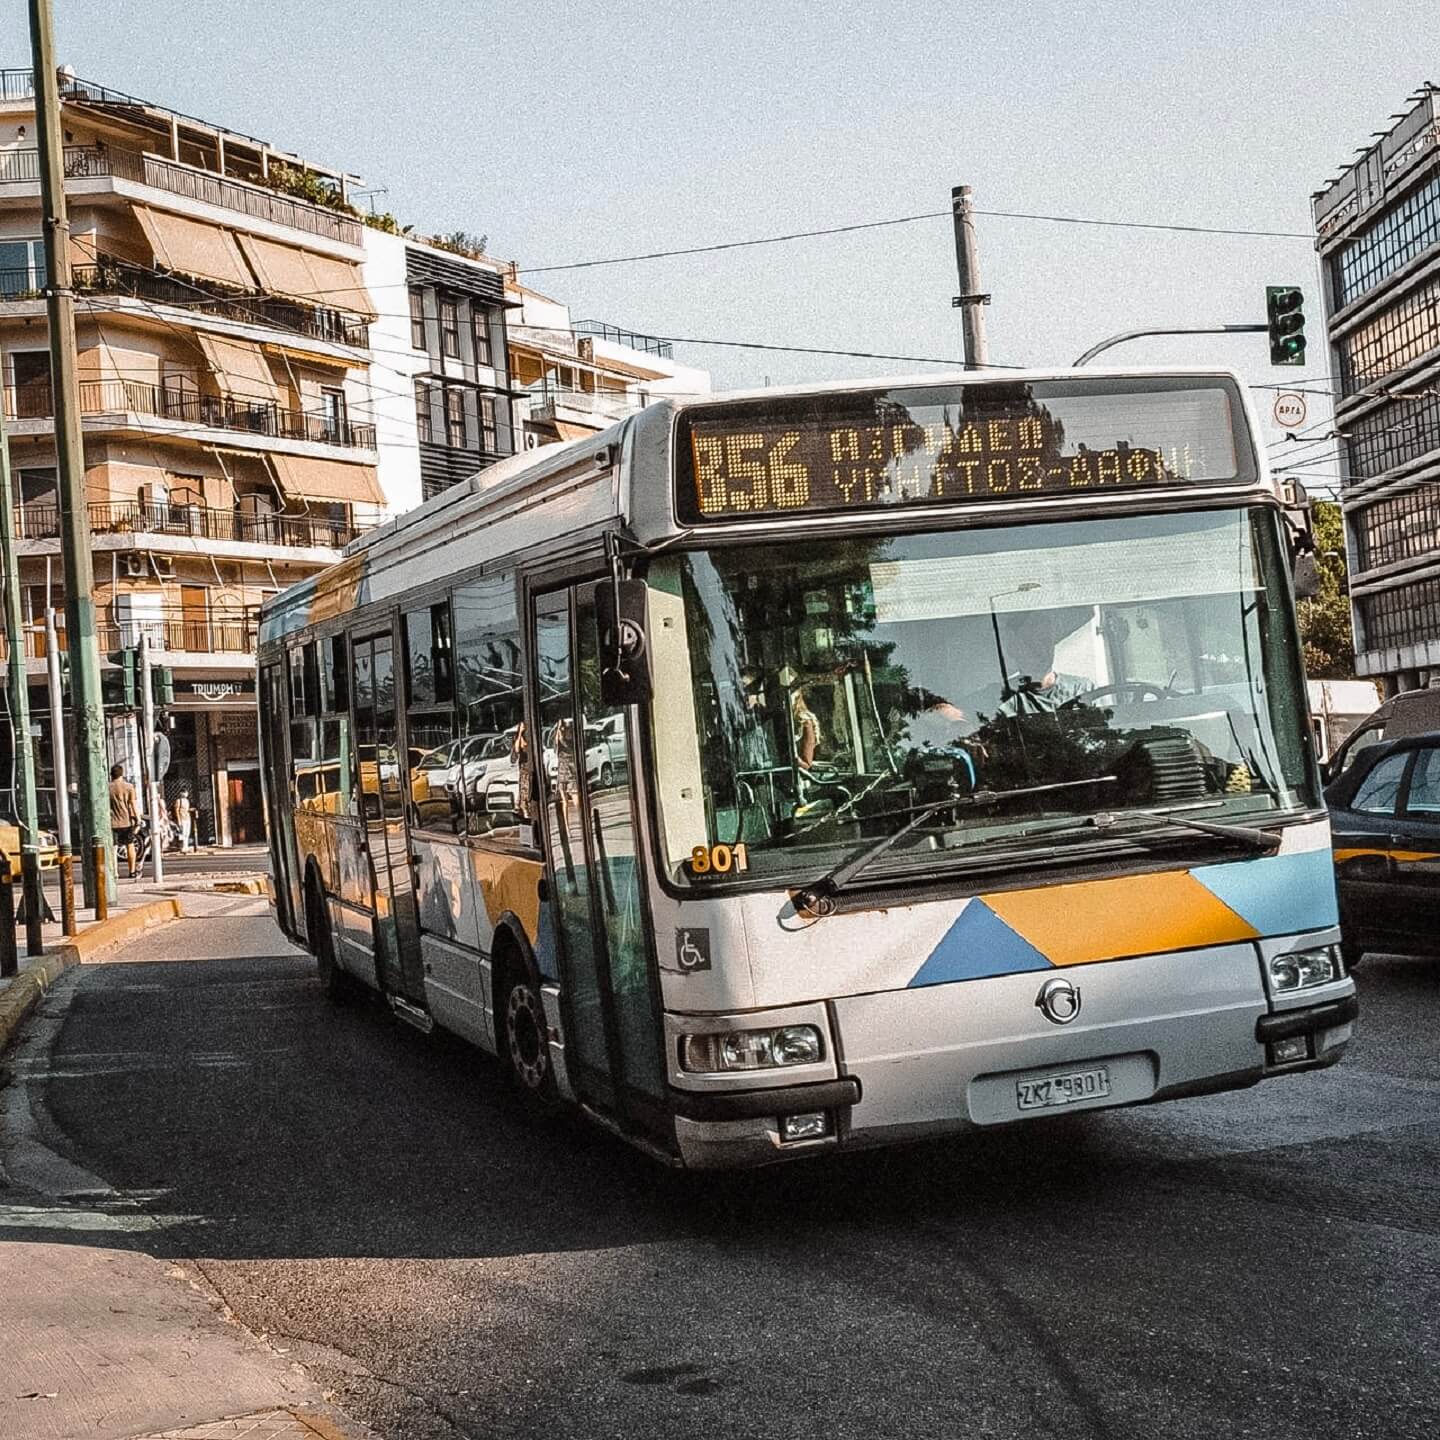 Local bus in Athens Greece